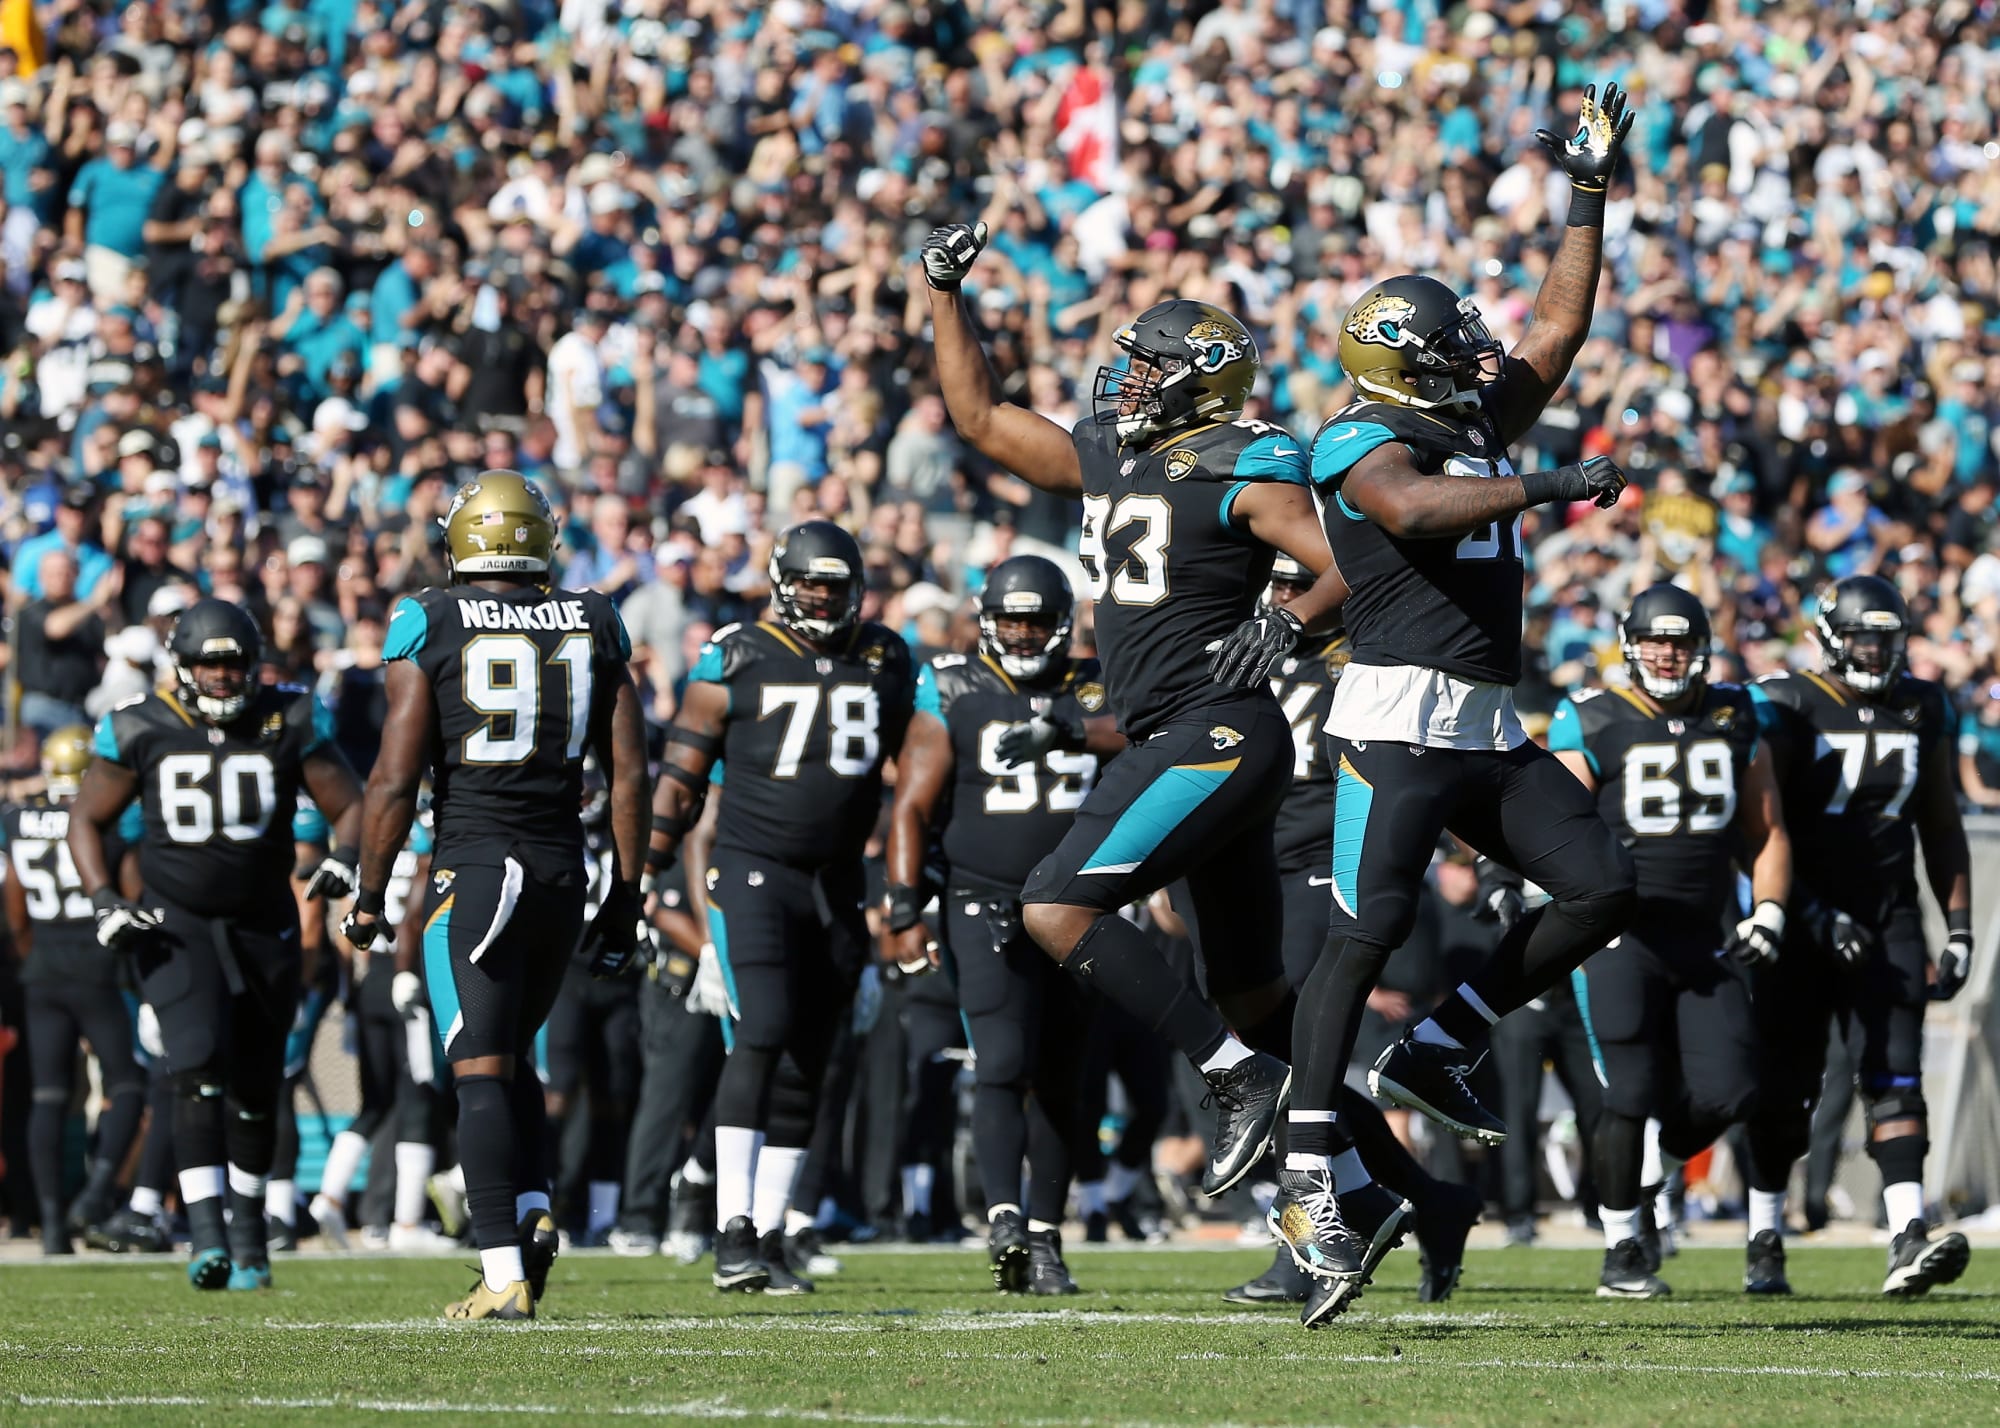 Jacksonville Jaguars have 8 of the top 100 players in the NFL according